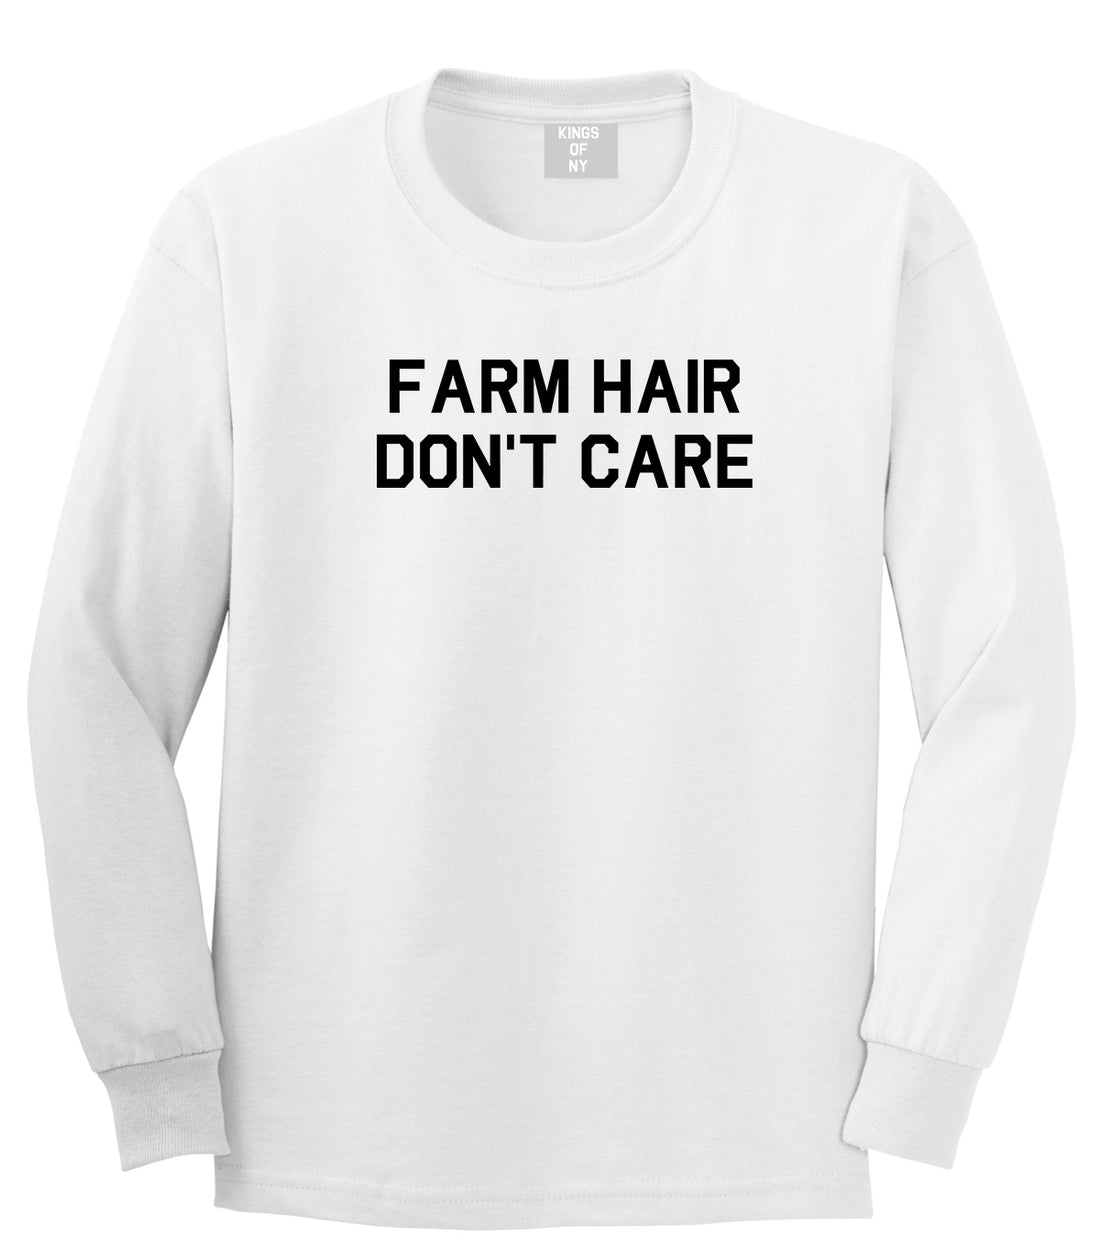 Farm Hair Dont Care Mens White Long Sleeve T-Shirt by KINGS OF NY